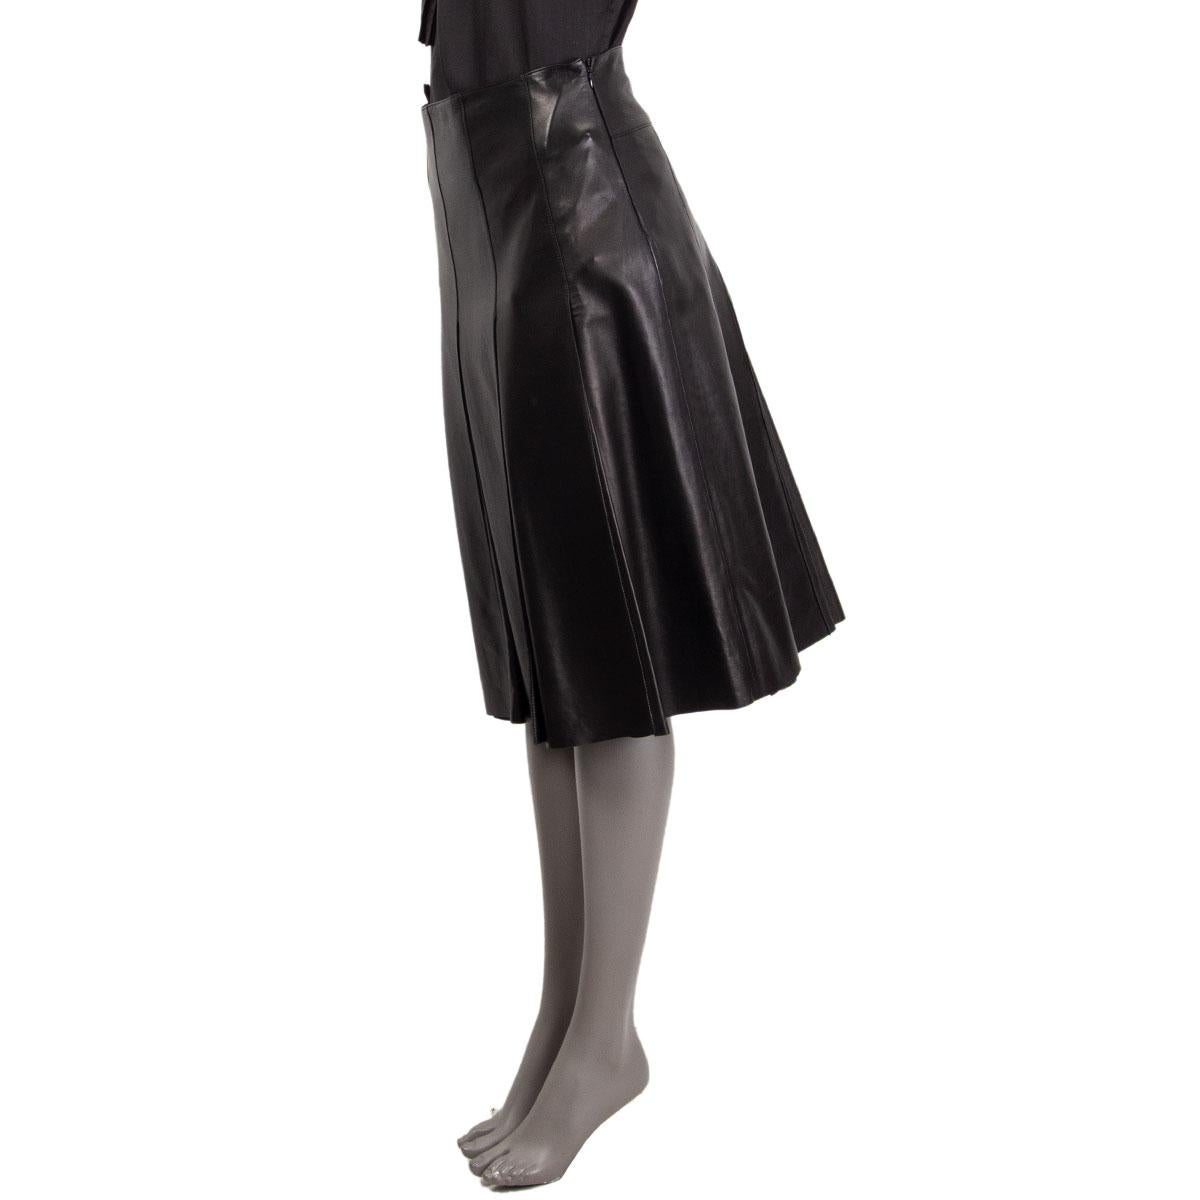 100% authentic Prada pleated skirt in black nappa leather (100%). Closes with a concealed zipper on the side and has a logo embossed buckle detail and a slit on the back waist-line. lined in black viscose (100%). Brand New with Tag.

Tag Size